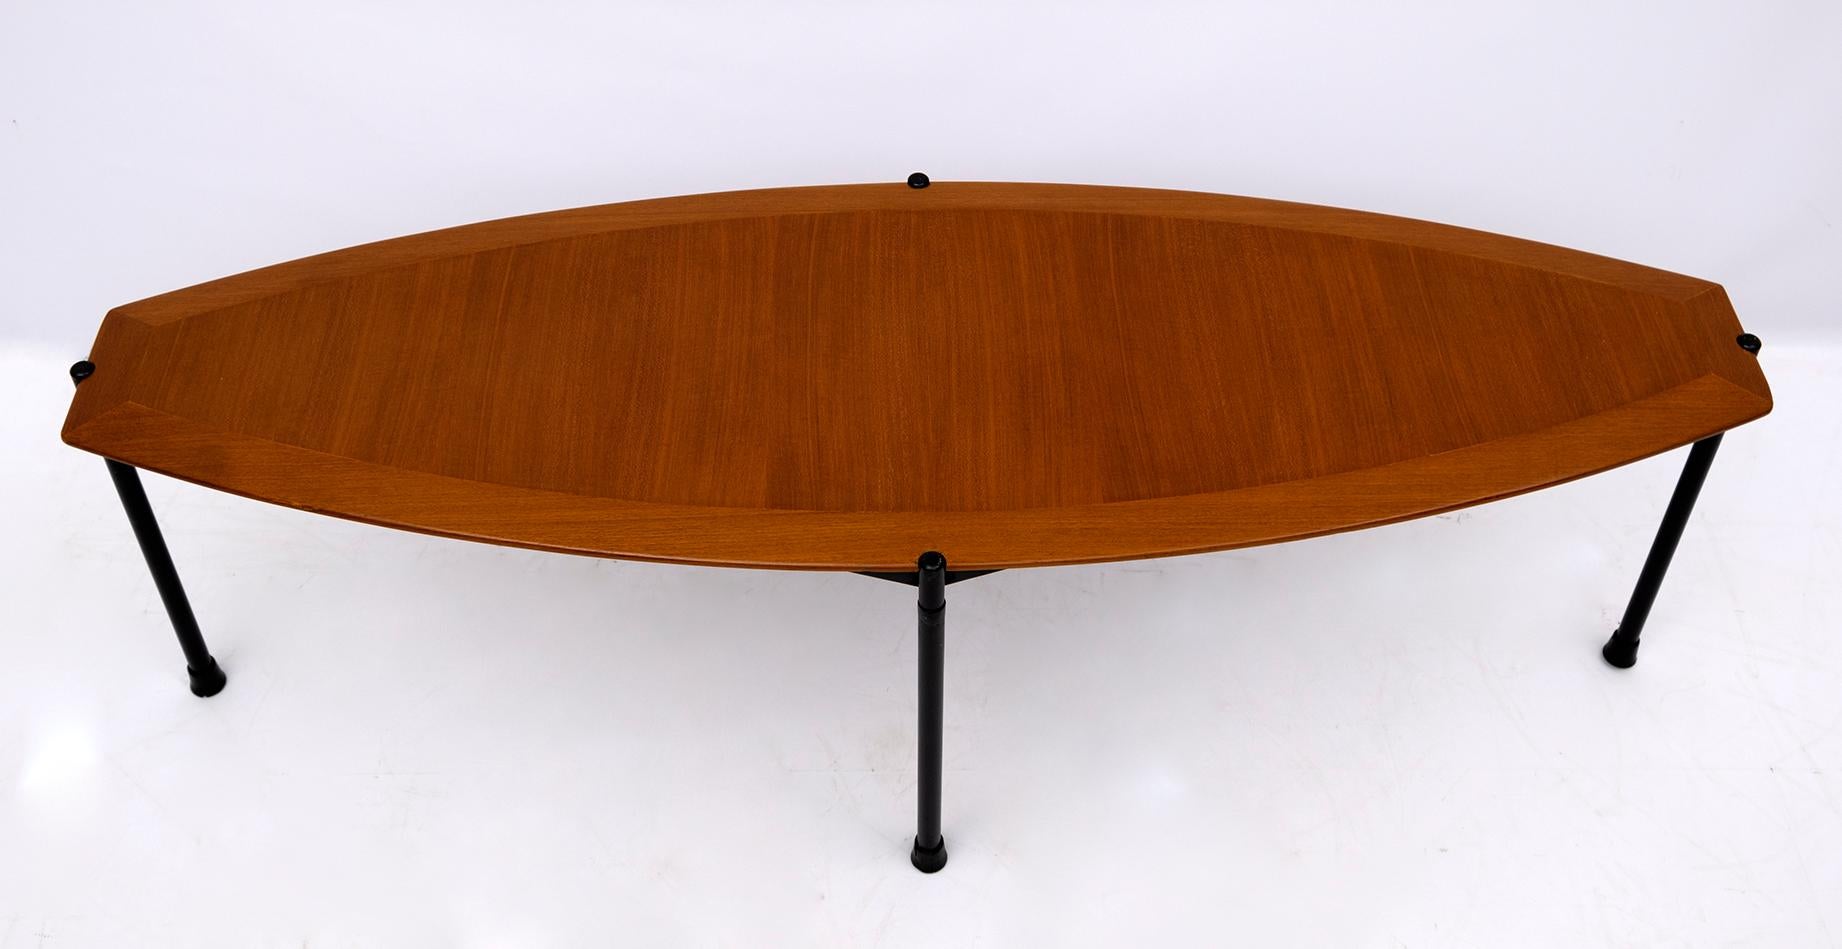 Particular coffee table from the 70s, top in mahogany veneer and metal base, the shape is reminiscent of a surfboard.